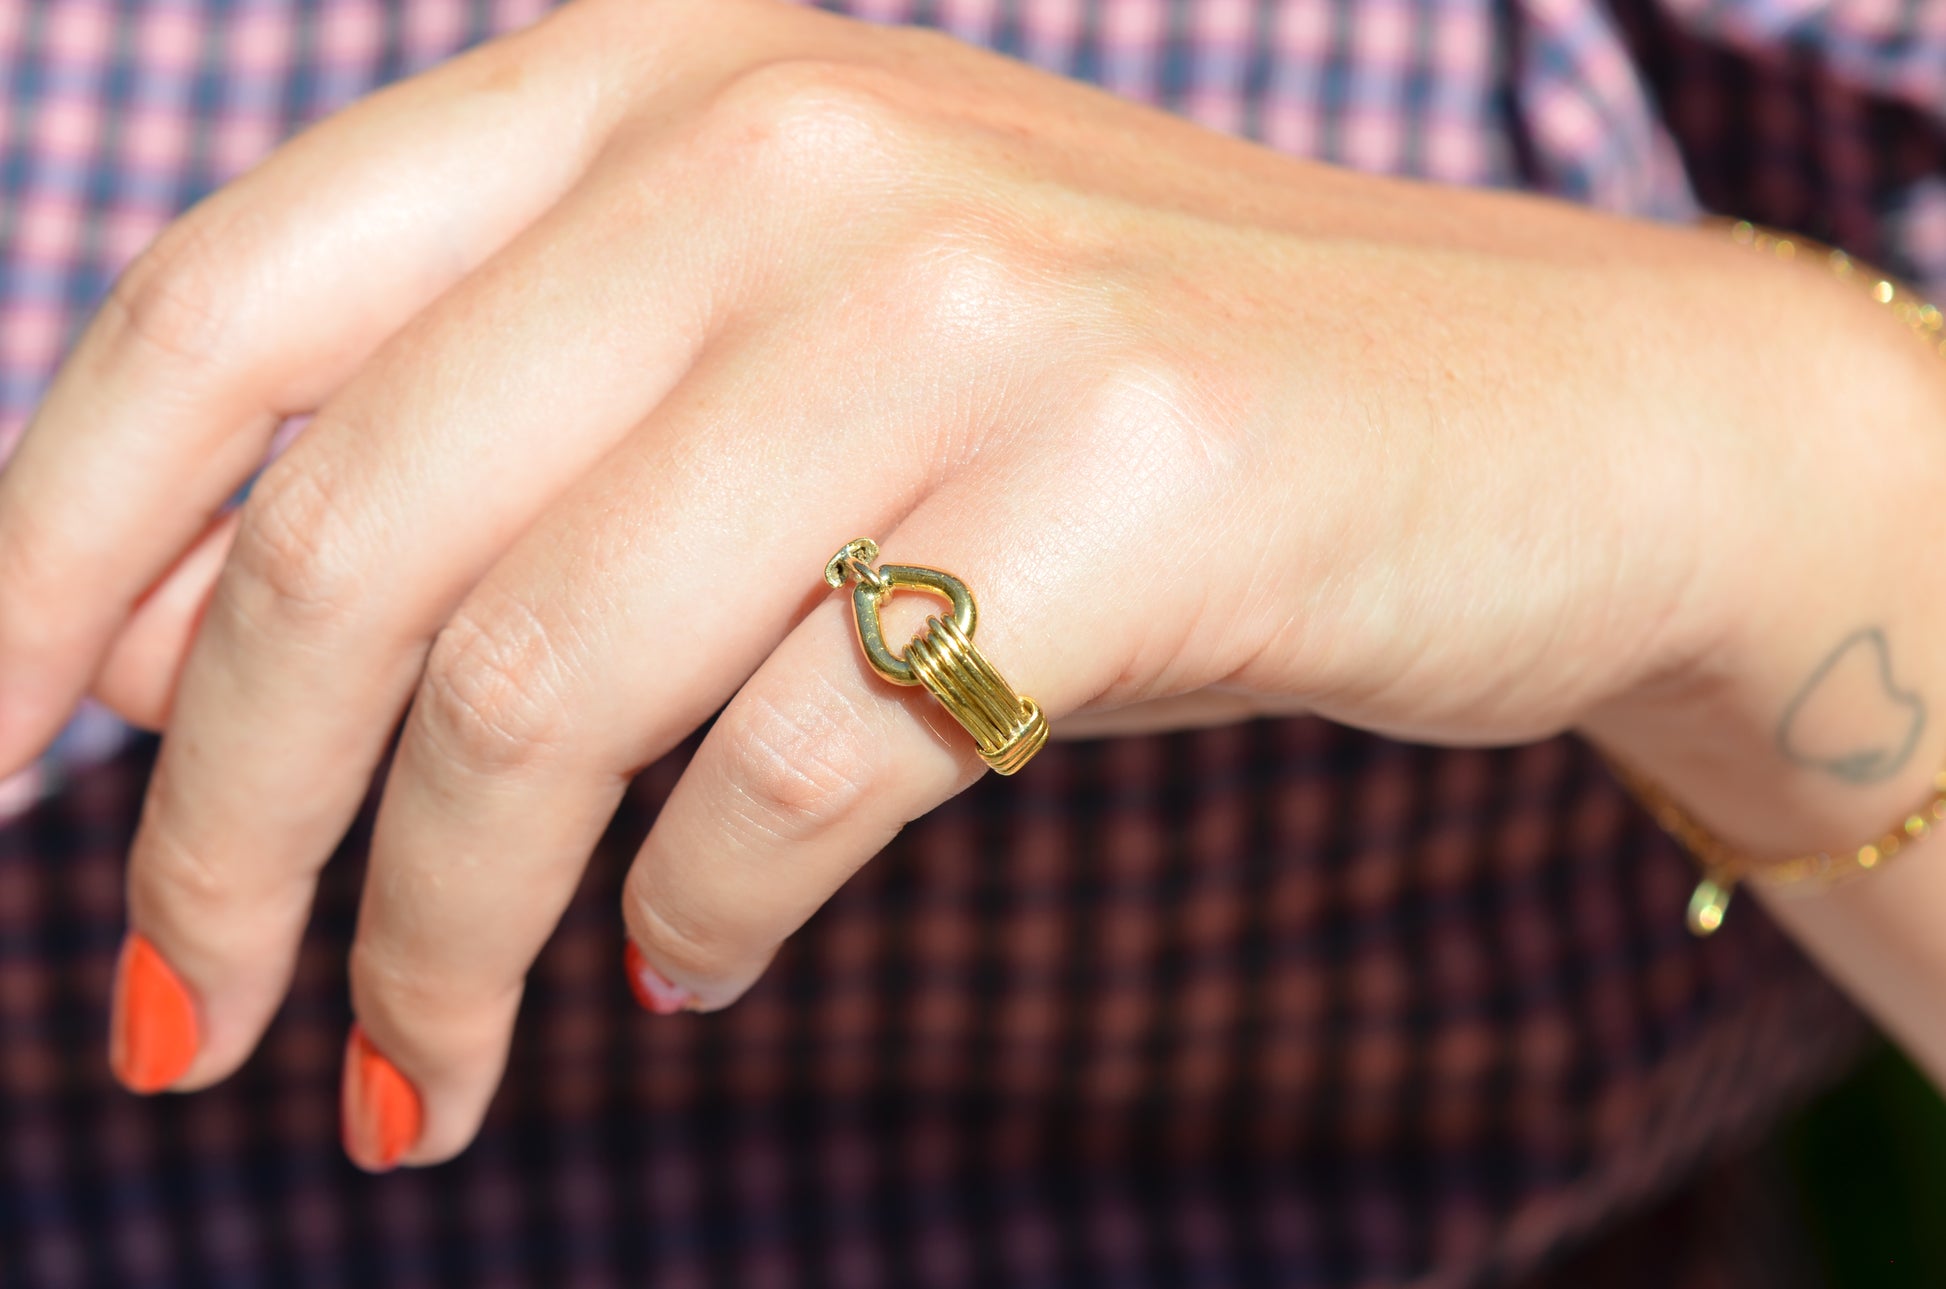 A medium-close view of the ring on a Caucasian model's left pinky finger. Her nail polish is an orangey-red, and in the background her blue and red gingham blouse is visible.